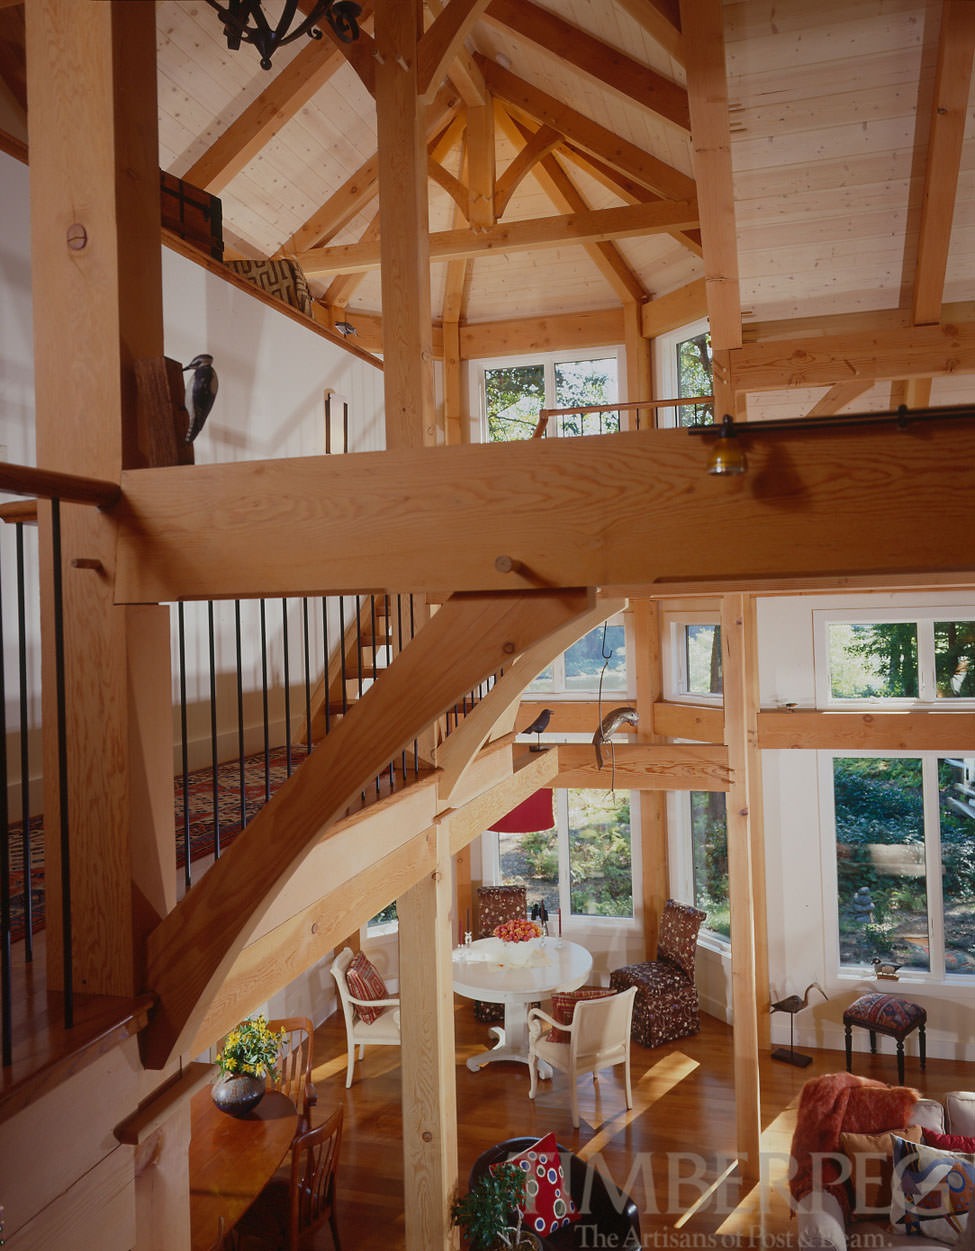 Concord, MA (5988) view from loft of timber frame ceiling and great room